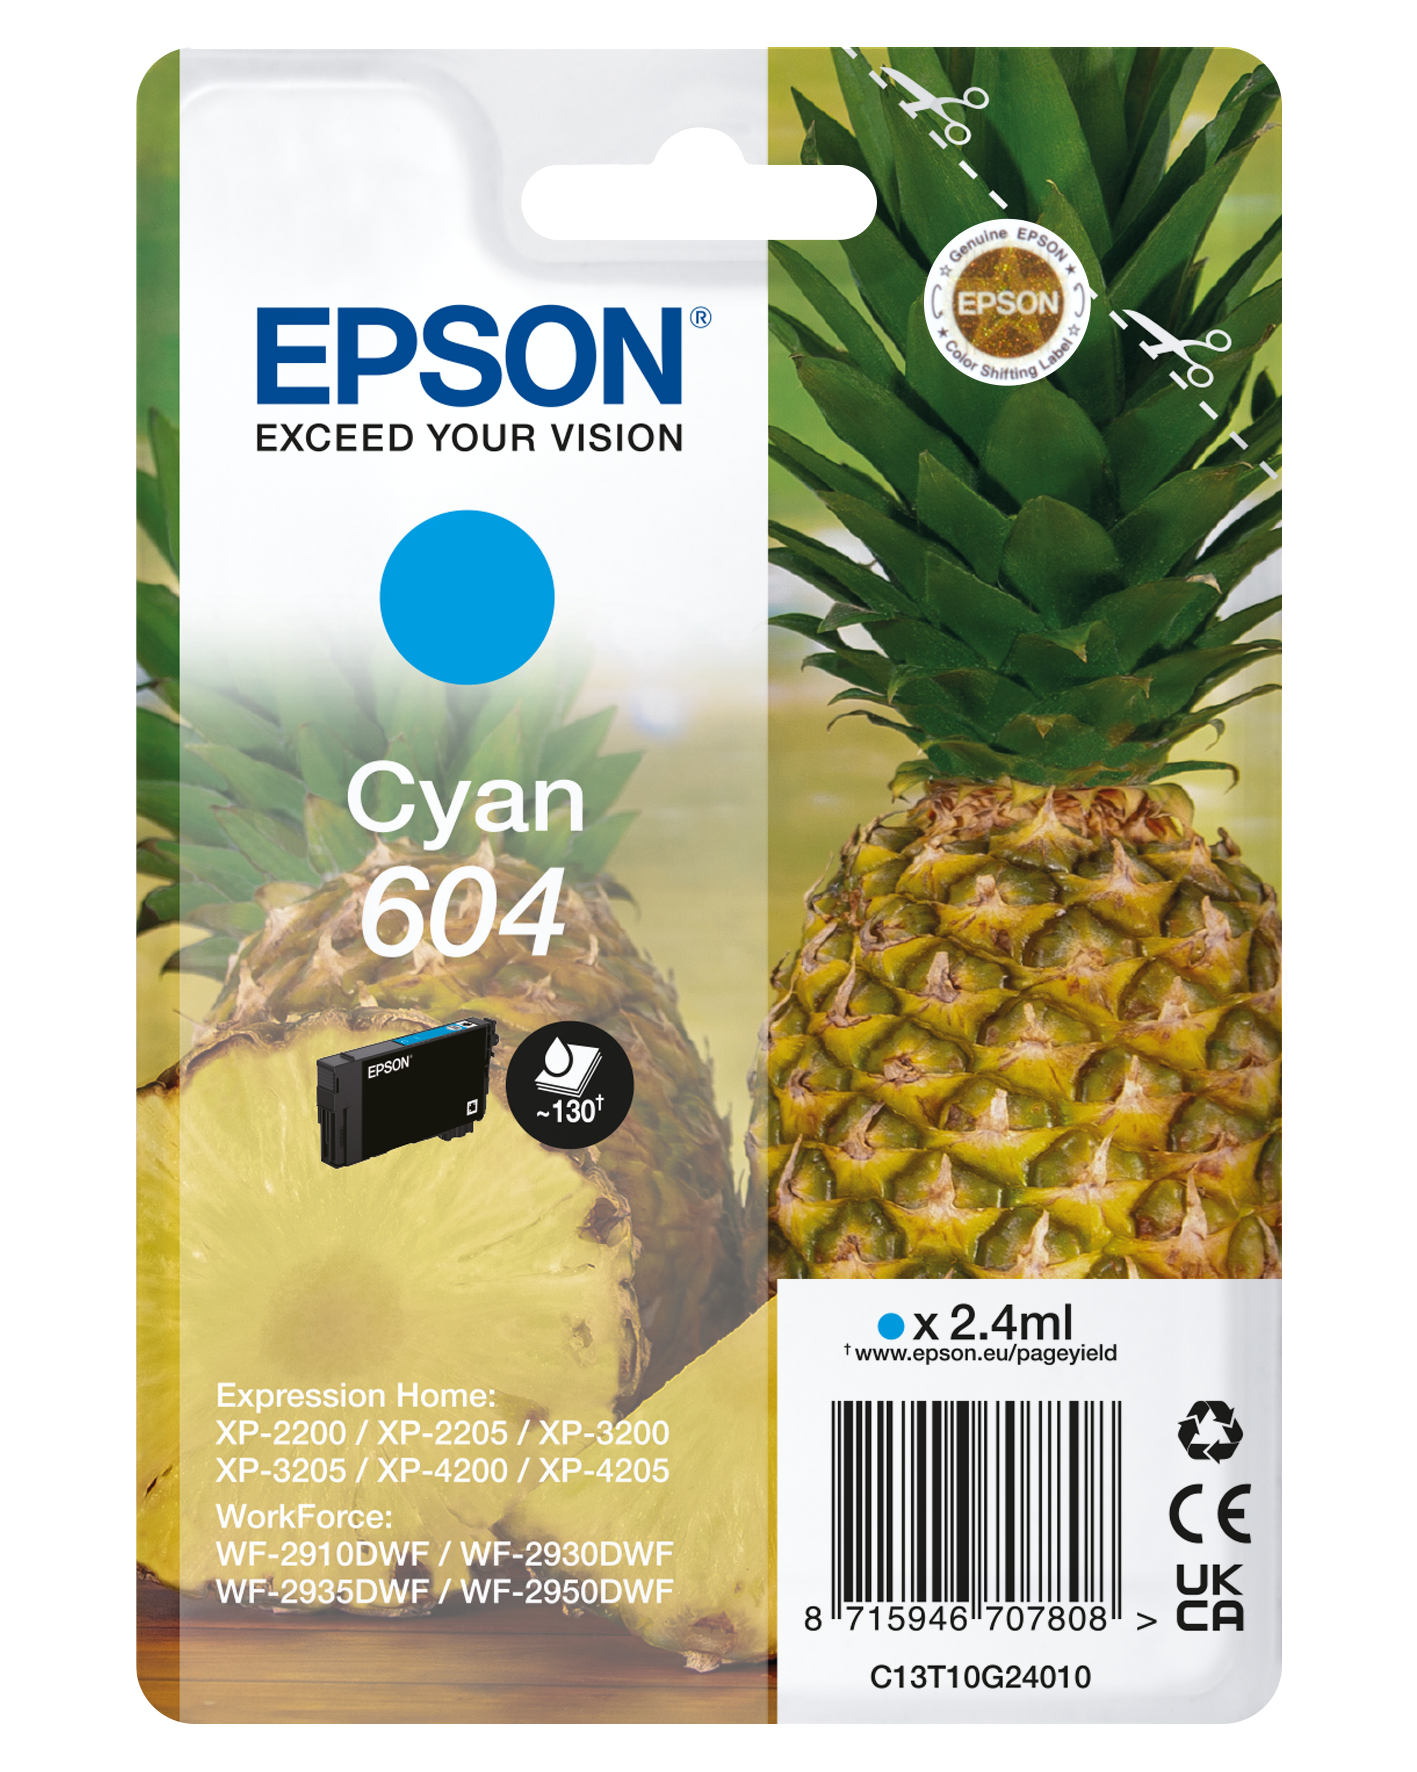 Expression Home XP-3205 | Consumer Inkjet | Epson Printers Printers | | Products Europe 